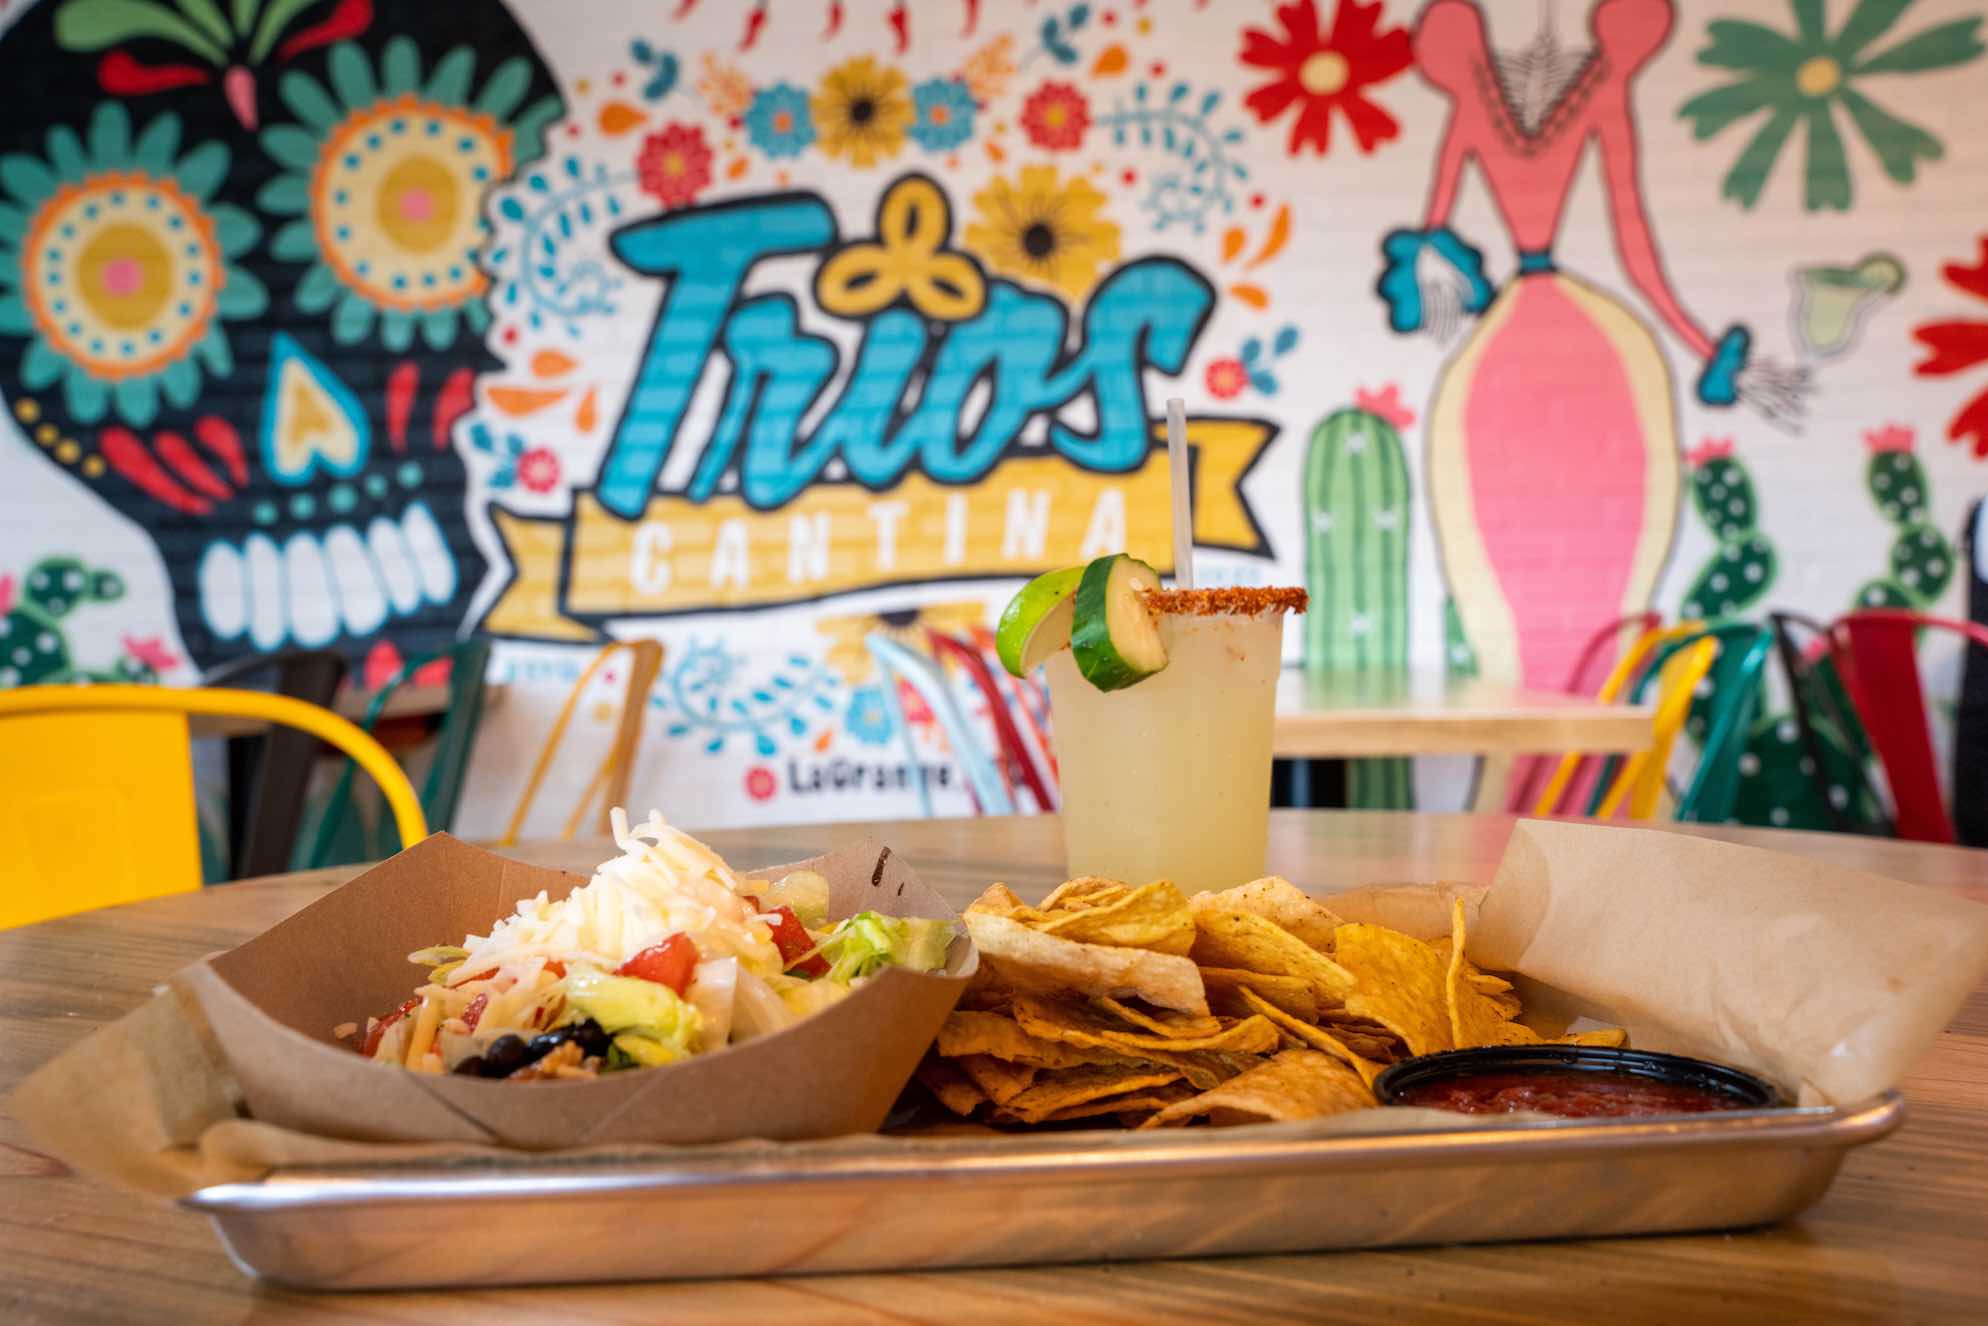 Trios-Cantina-Food-With-Mural-Backdrop-Visit-LaGrange